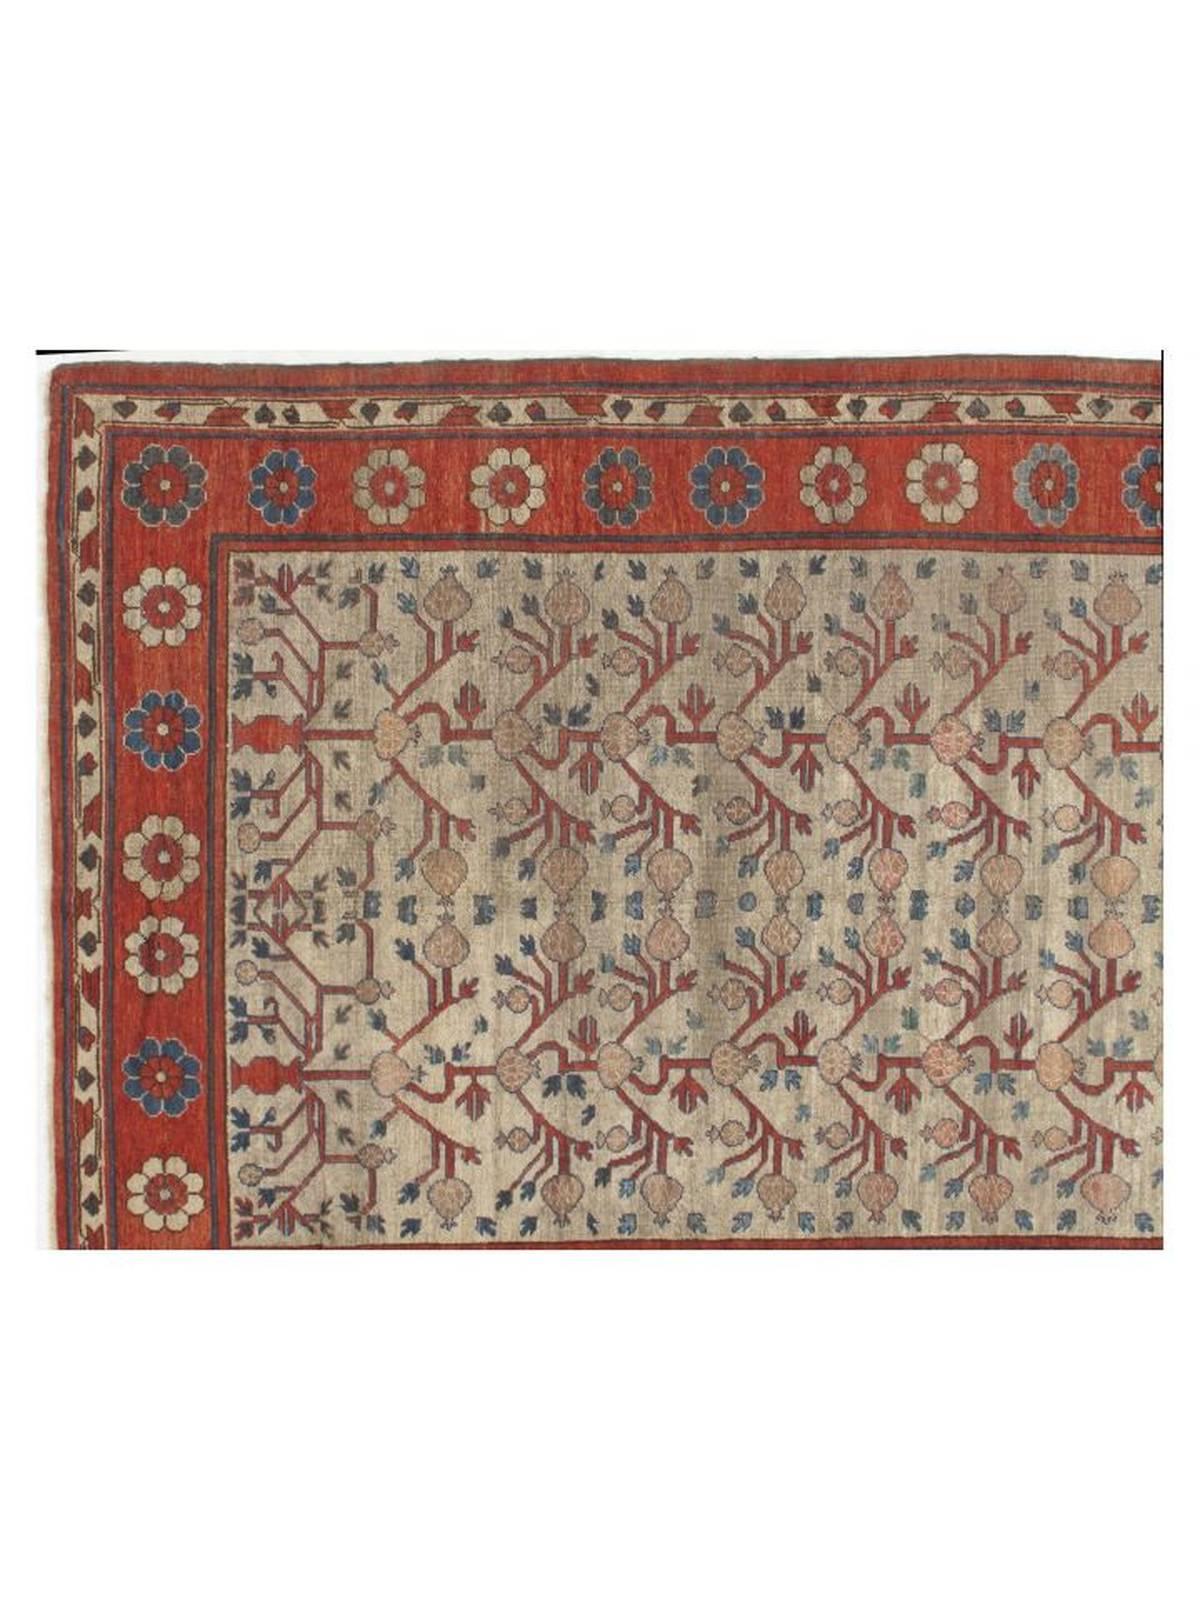 Antique, low pile Khotan with ivory field base with a floral design in red, gray, blue and dusty rose. Very good condition with minor wear consistent with age and use.